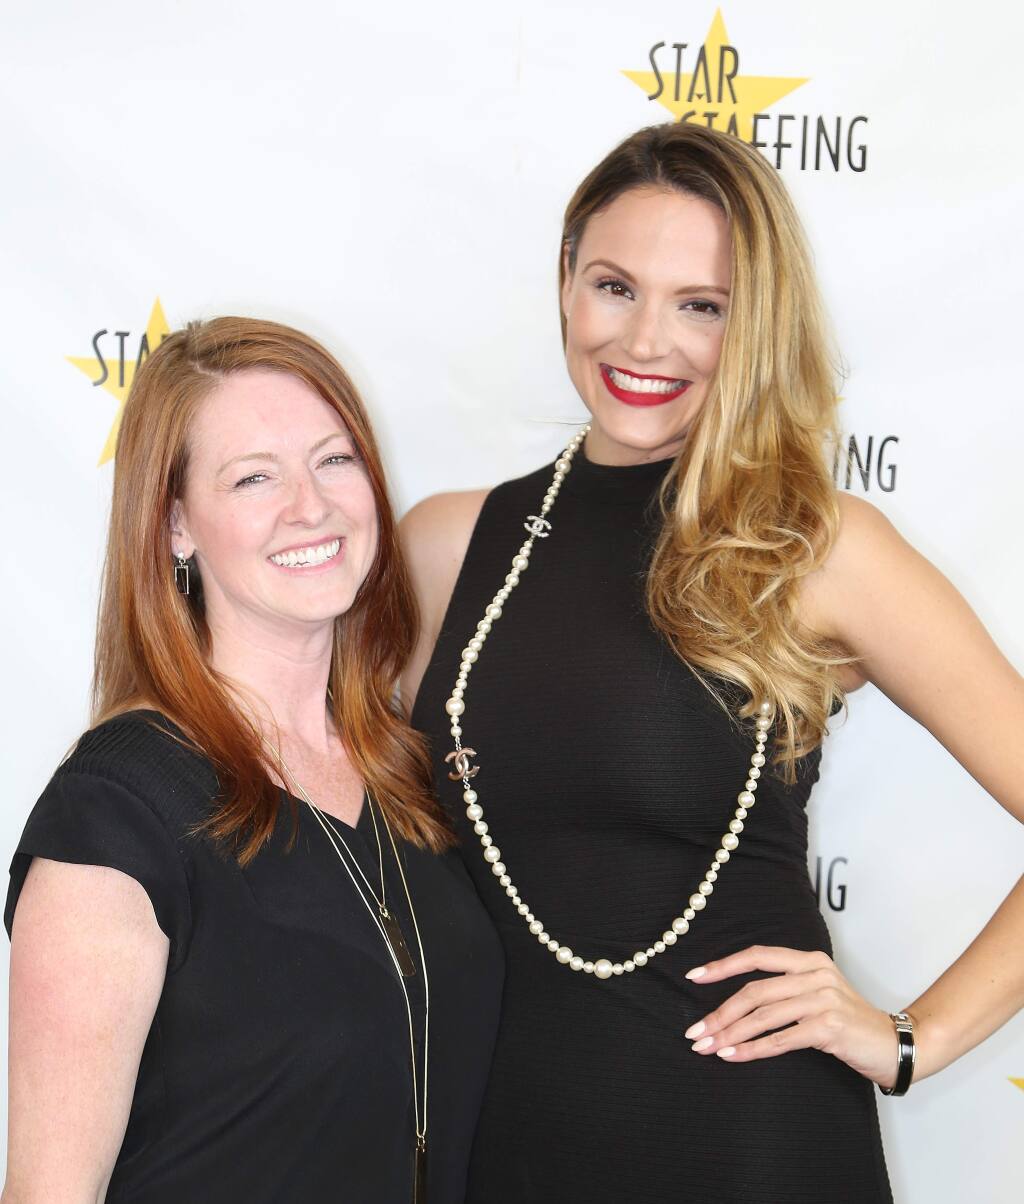 Star Staffing owners Lisa Lichty and Nicole Smartt at the North Bay Business Journal Forty Under 40 awards preparty, held at Fountaingrove Inn in Santa Rosa on April 15, 2016. Star Staffing sponsored the party. (Will Bucquoy / WB Photography)